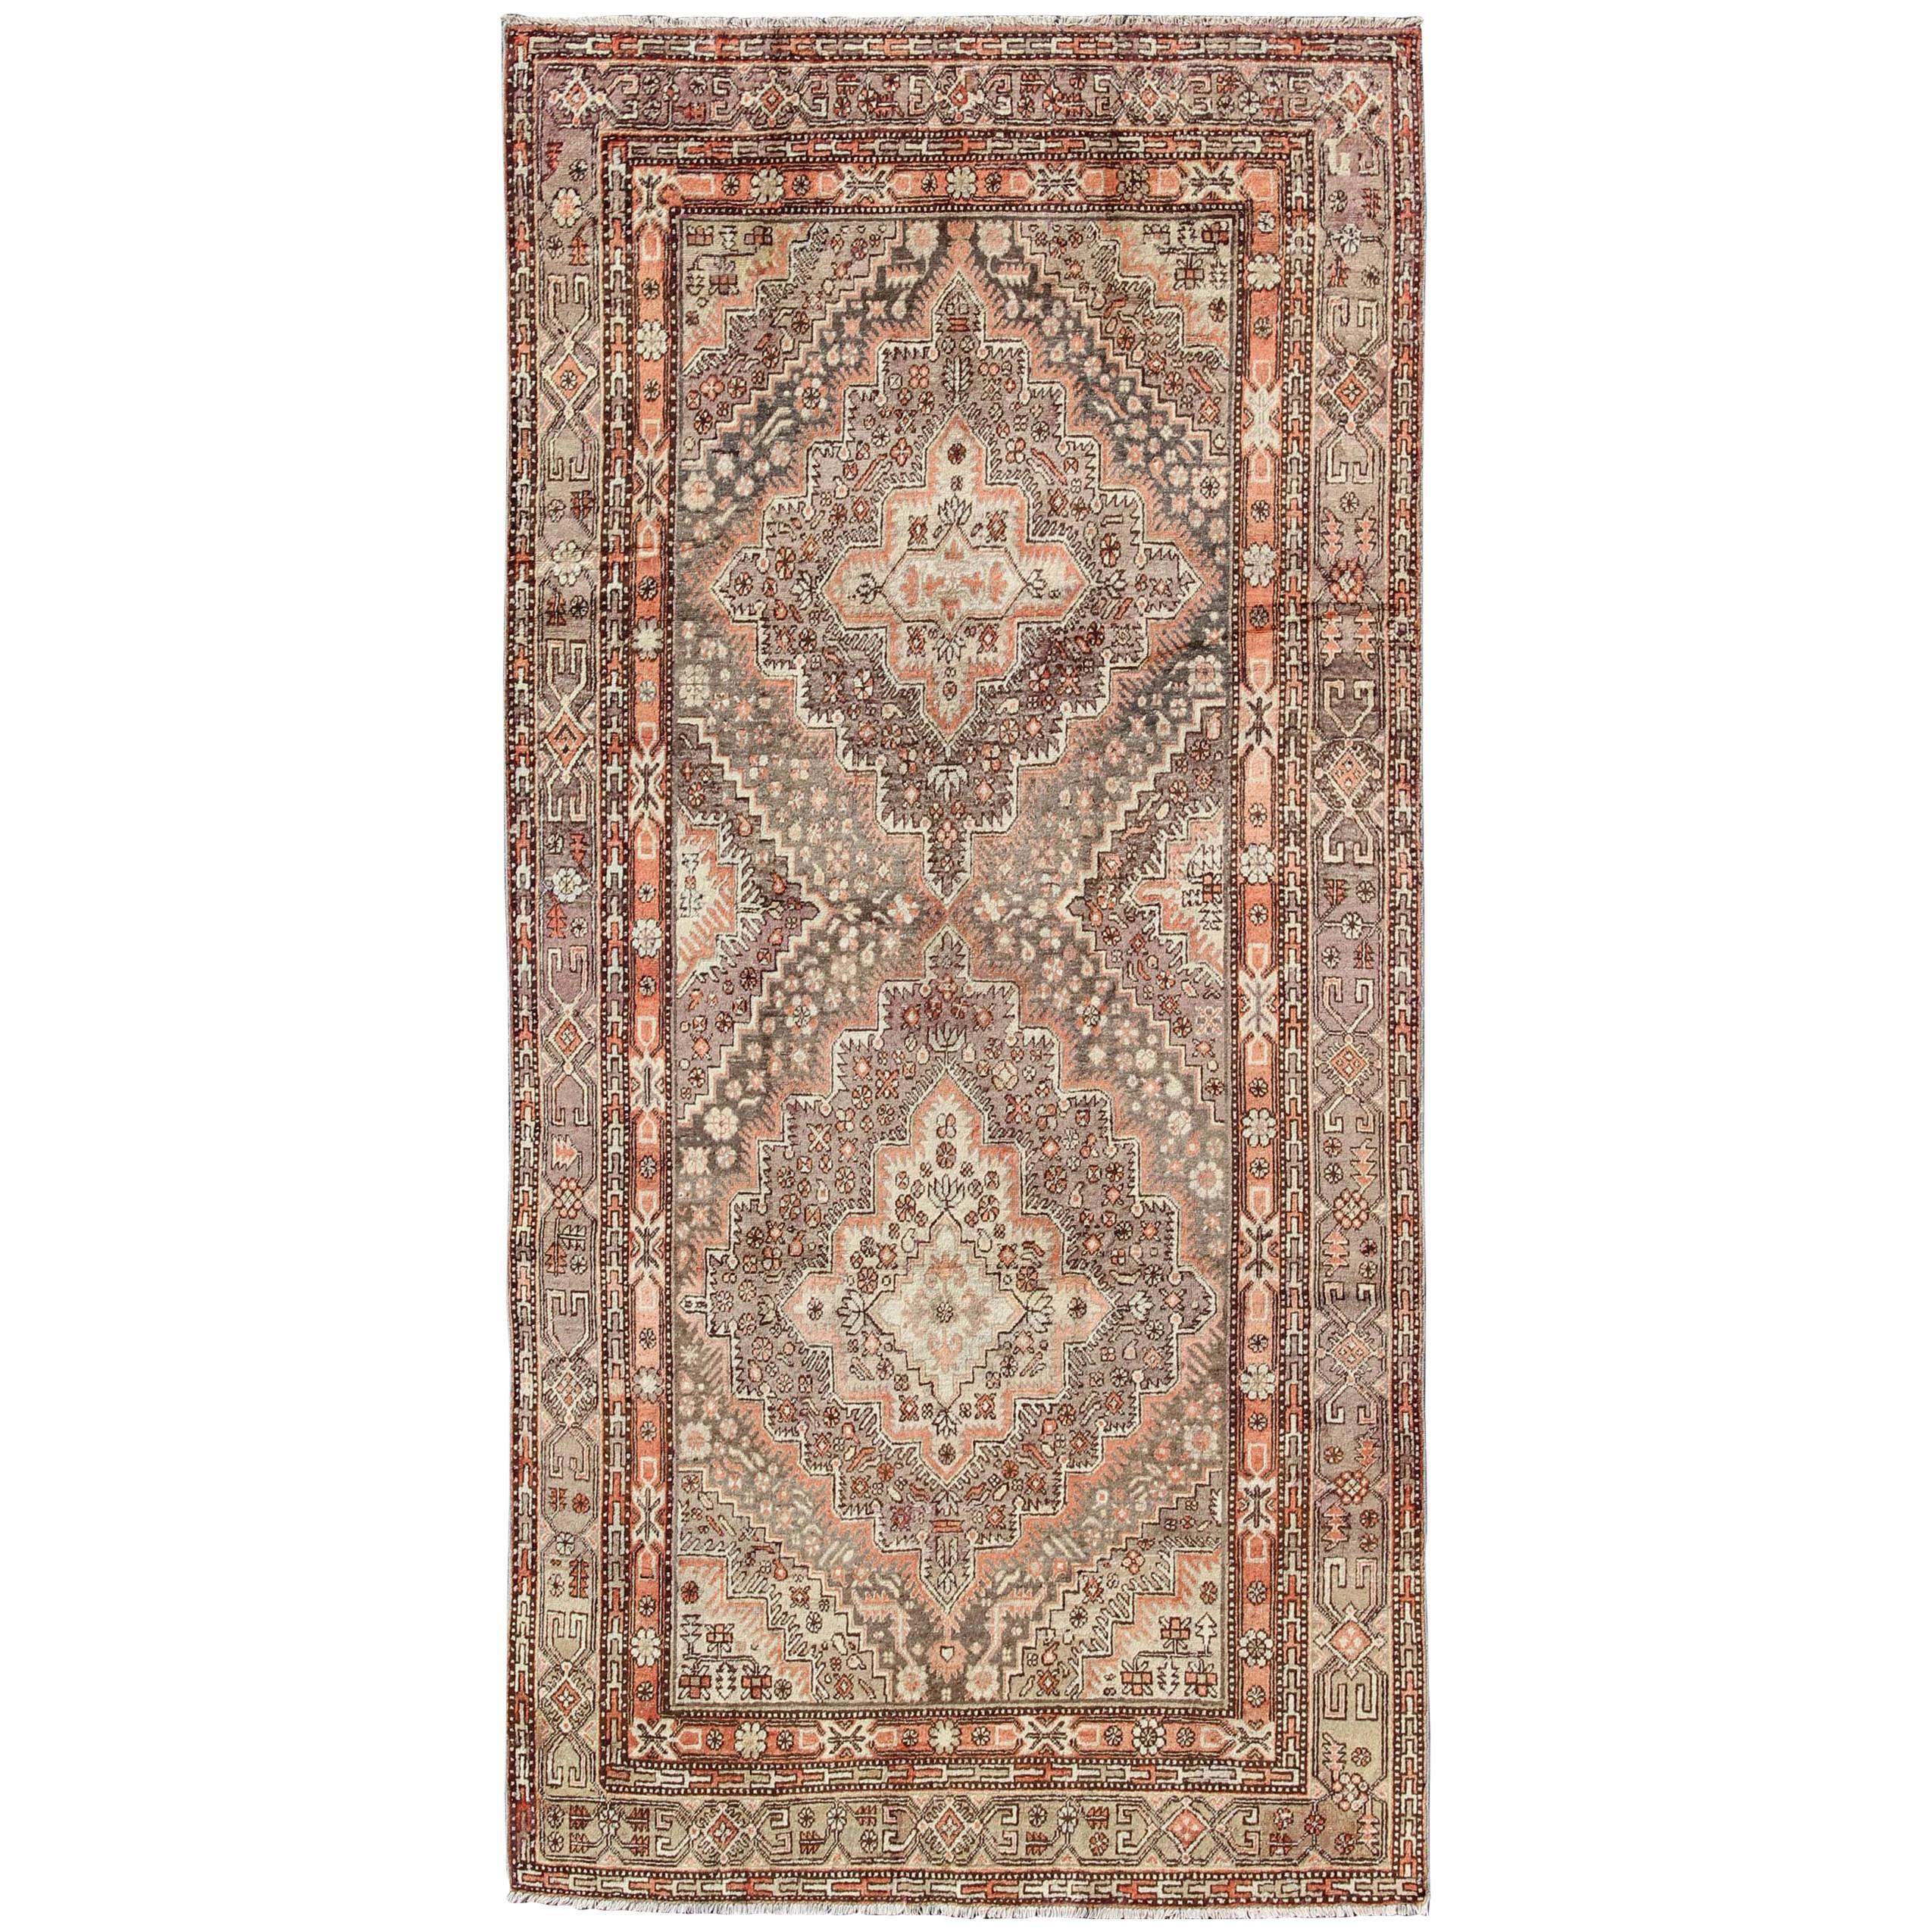 Early 20th Century Antique Khotan Rug with Paired Medallions in Gray and Red For Sale